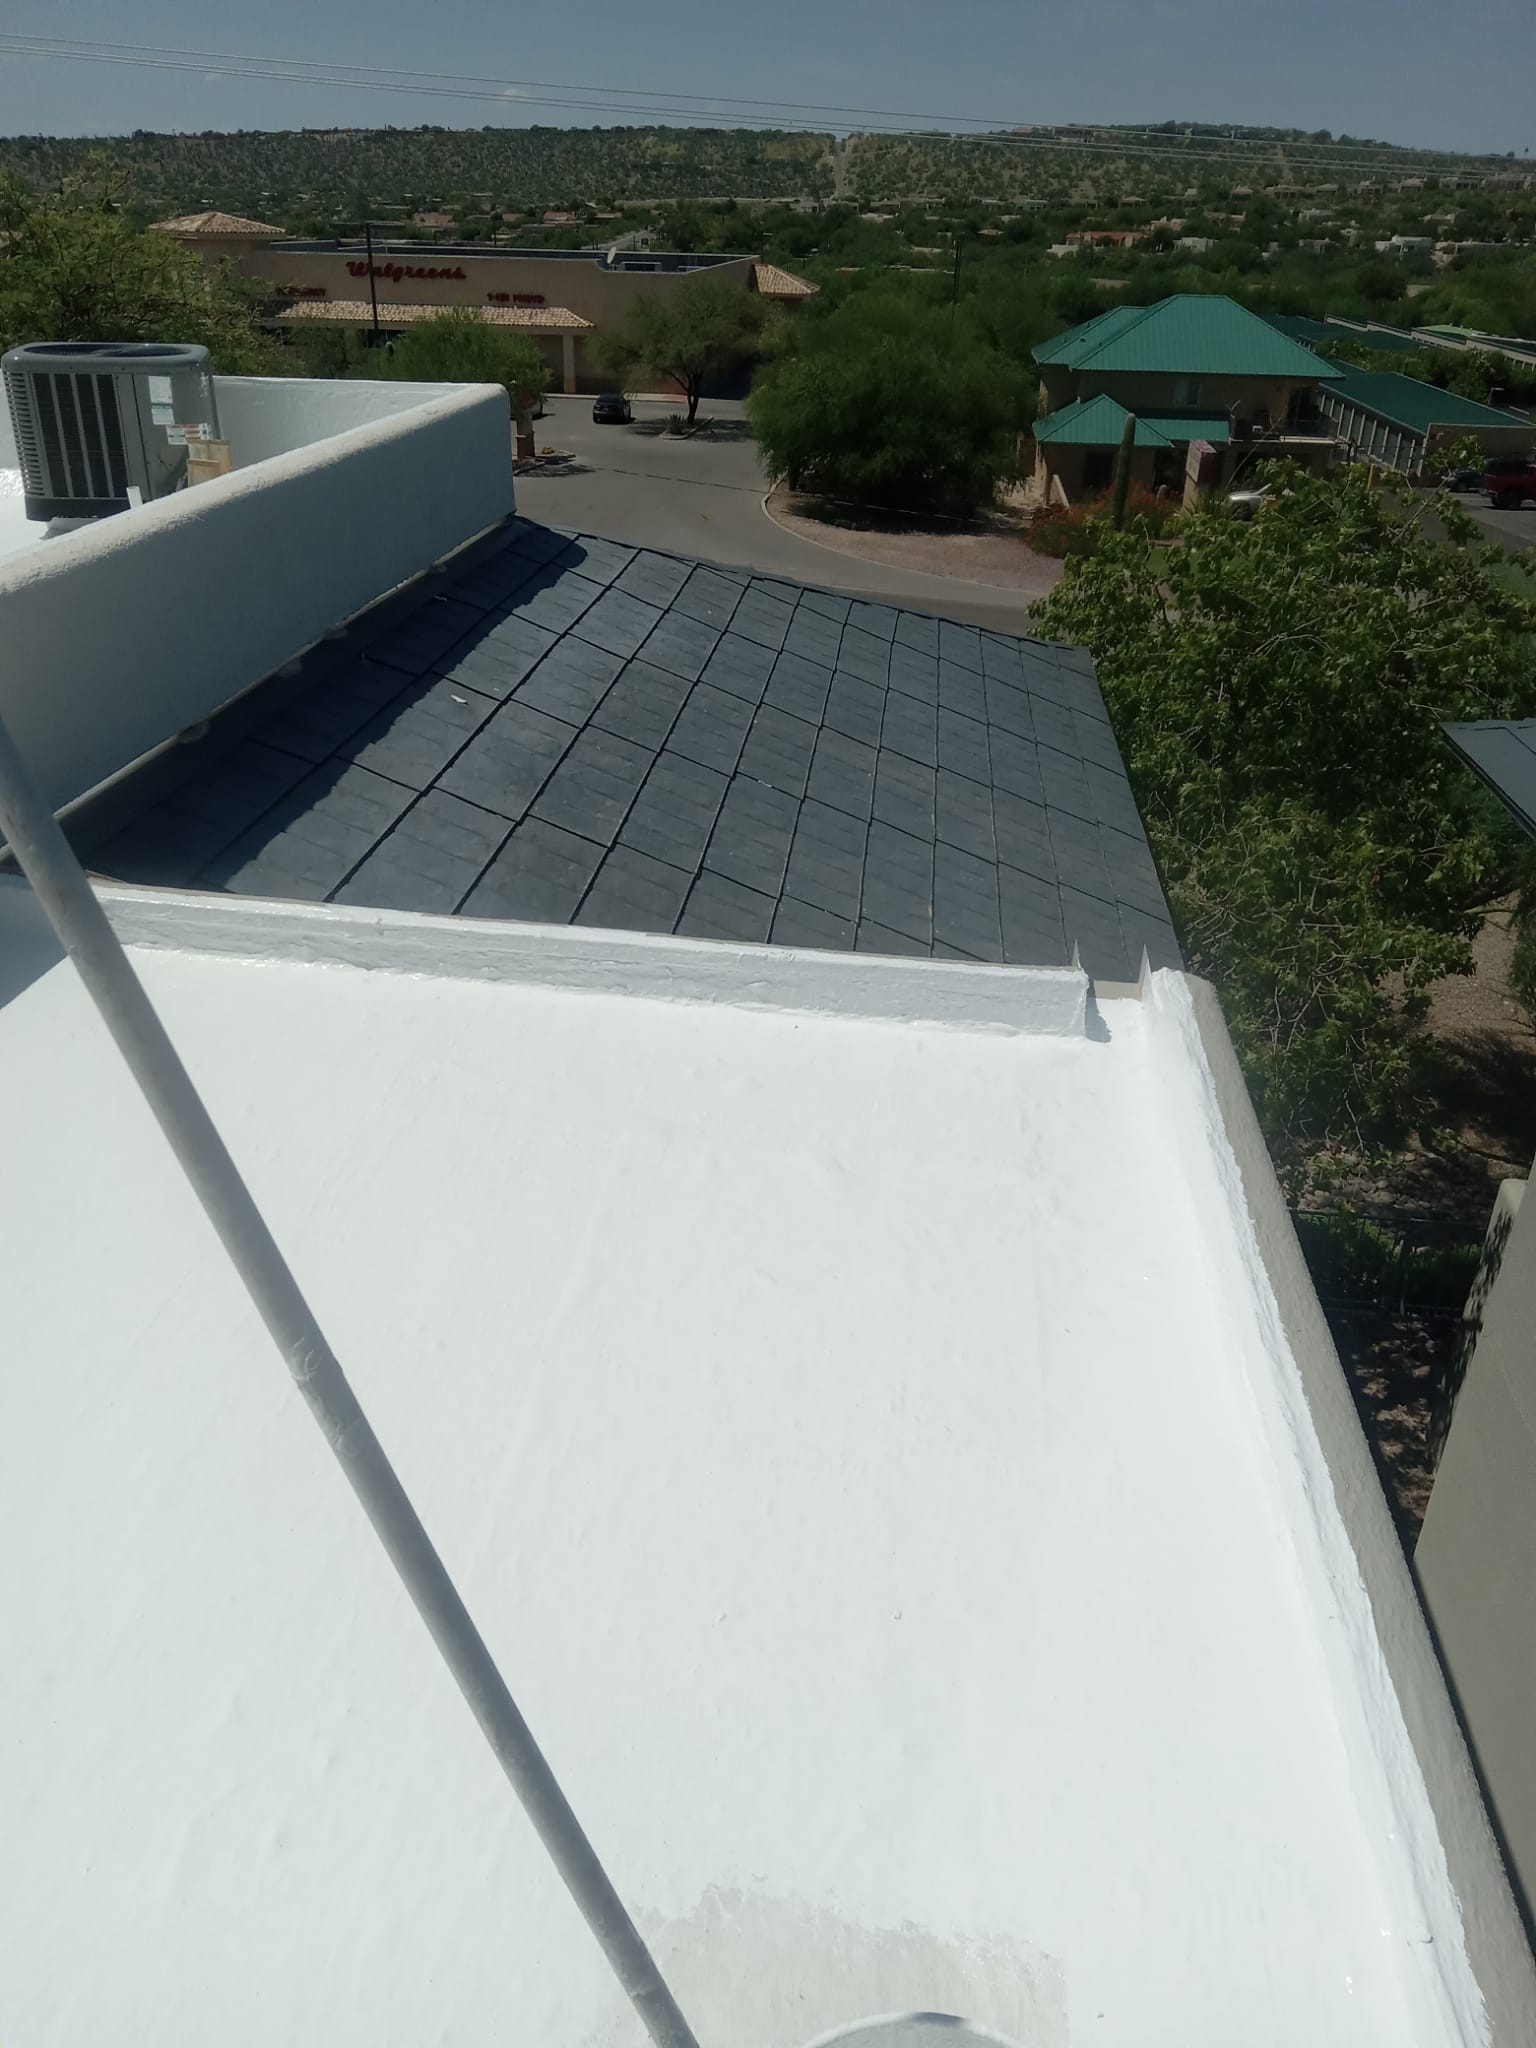 View of a partially coated roof in Gilbert, with spray foam insulation applied on the flat surface adjacent to dark roof tiles.